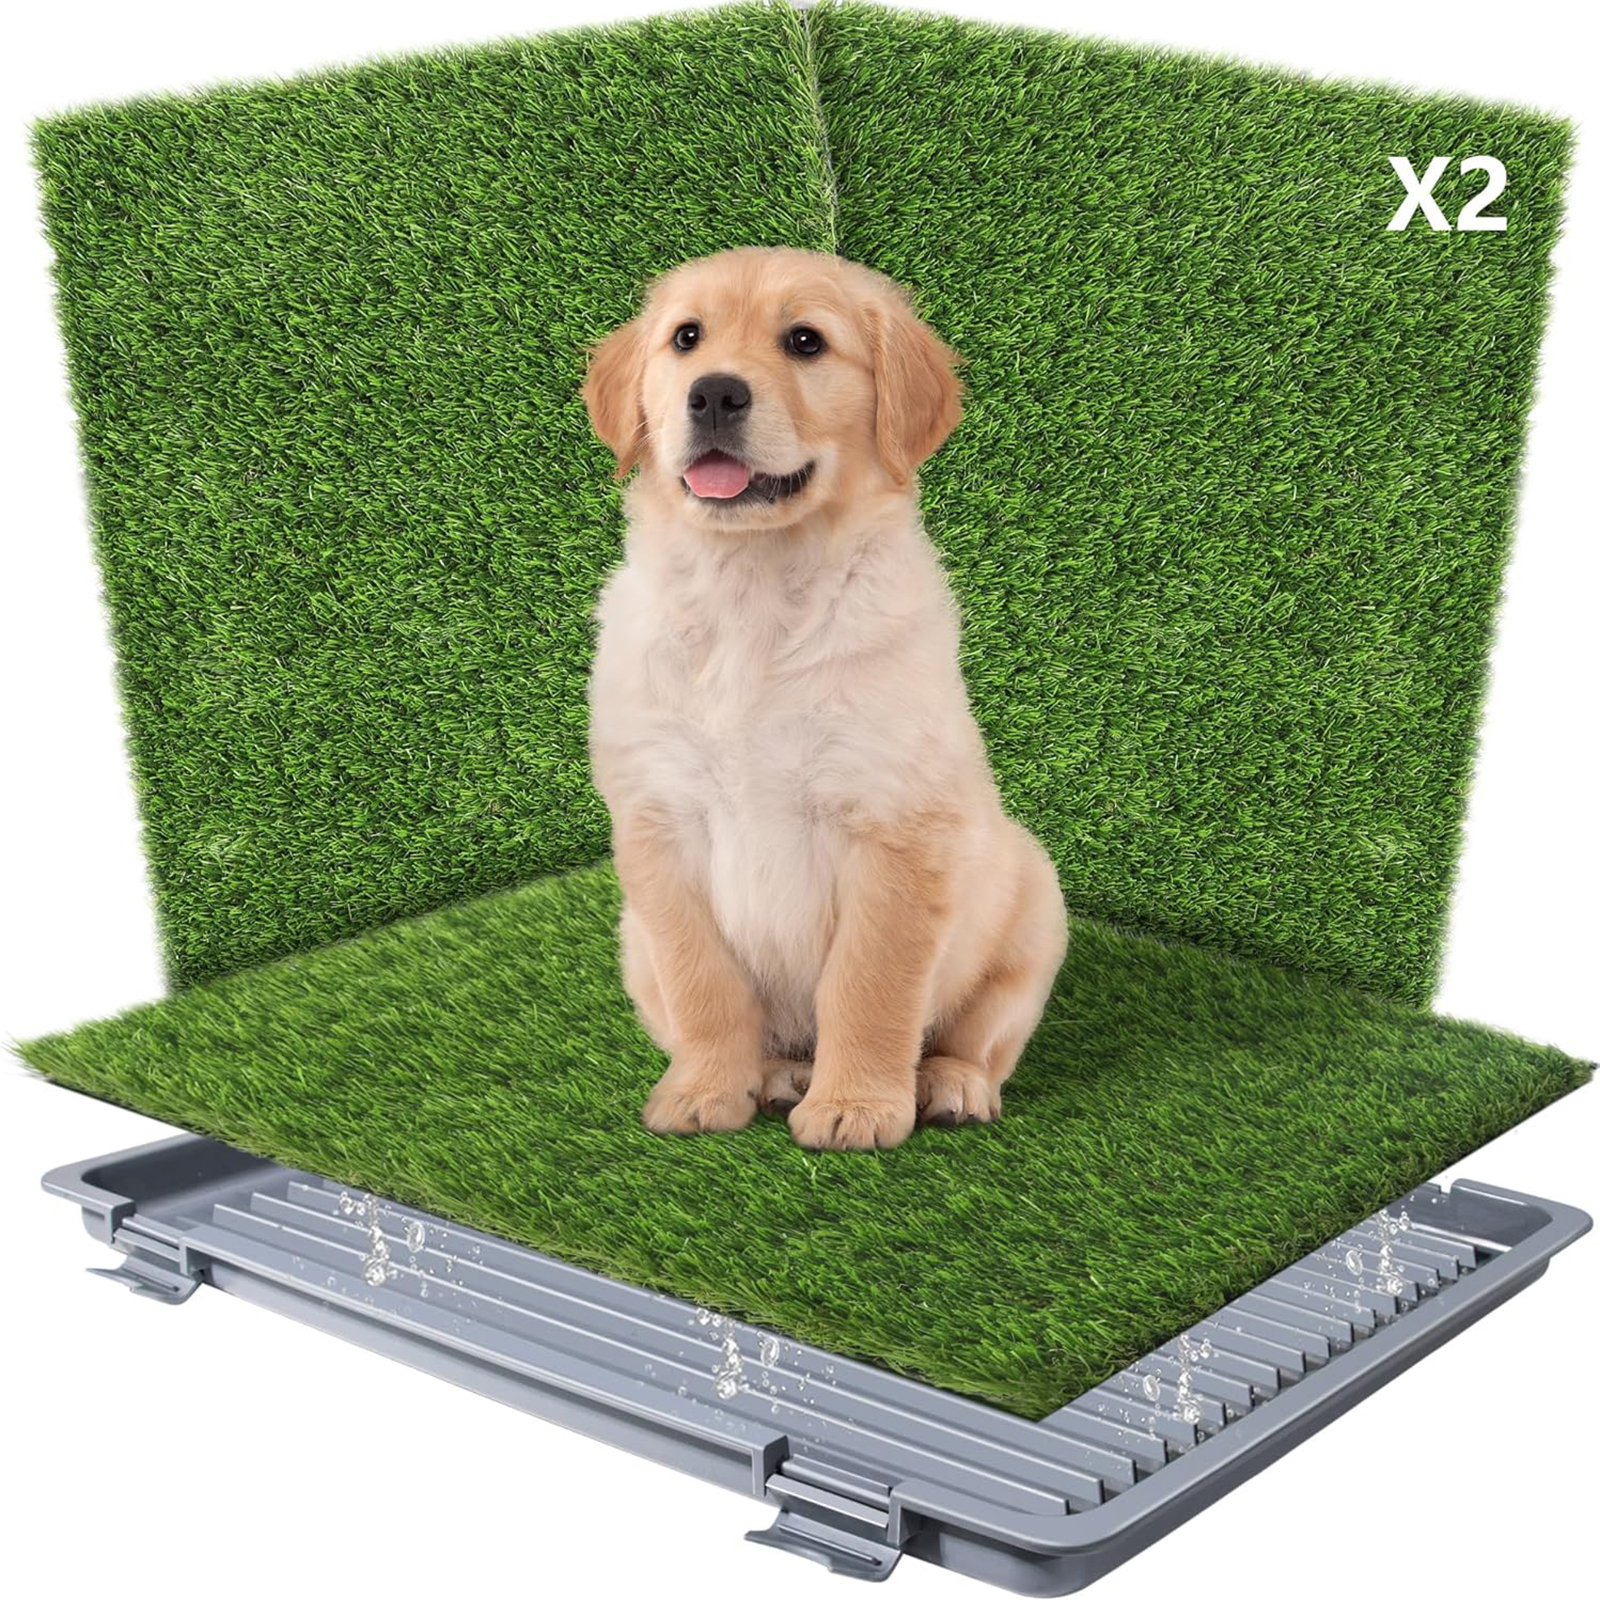 

Dog Grass Pad With Tray, Dog Grass Potty Litter Box With 2 Pcs Fake Washable Pee Pads, Artificial Dog Grass Bathroom Turf For Puppy Training